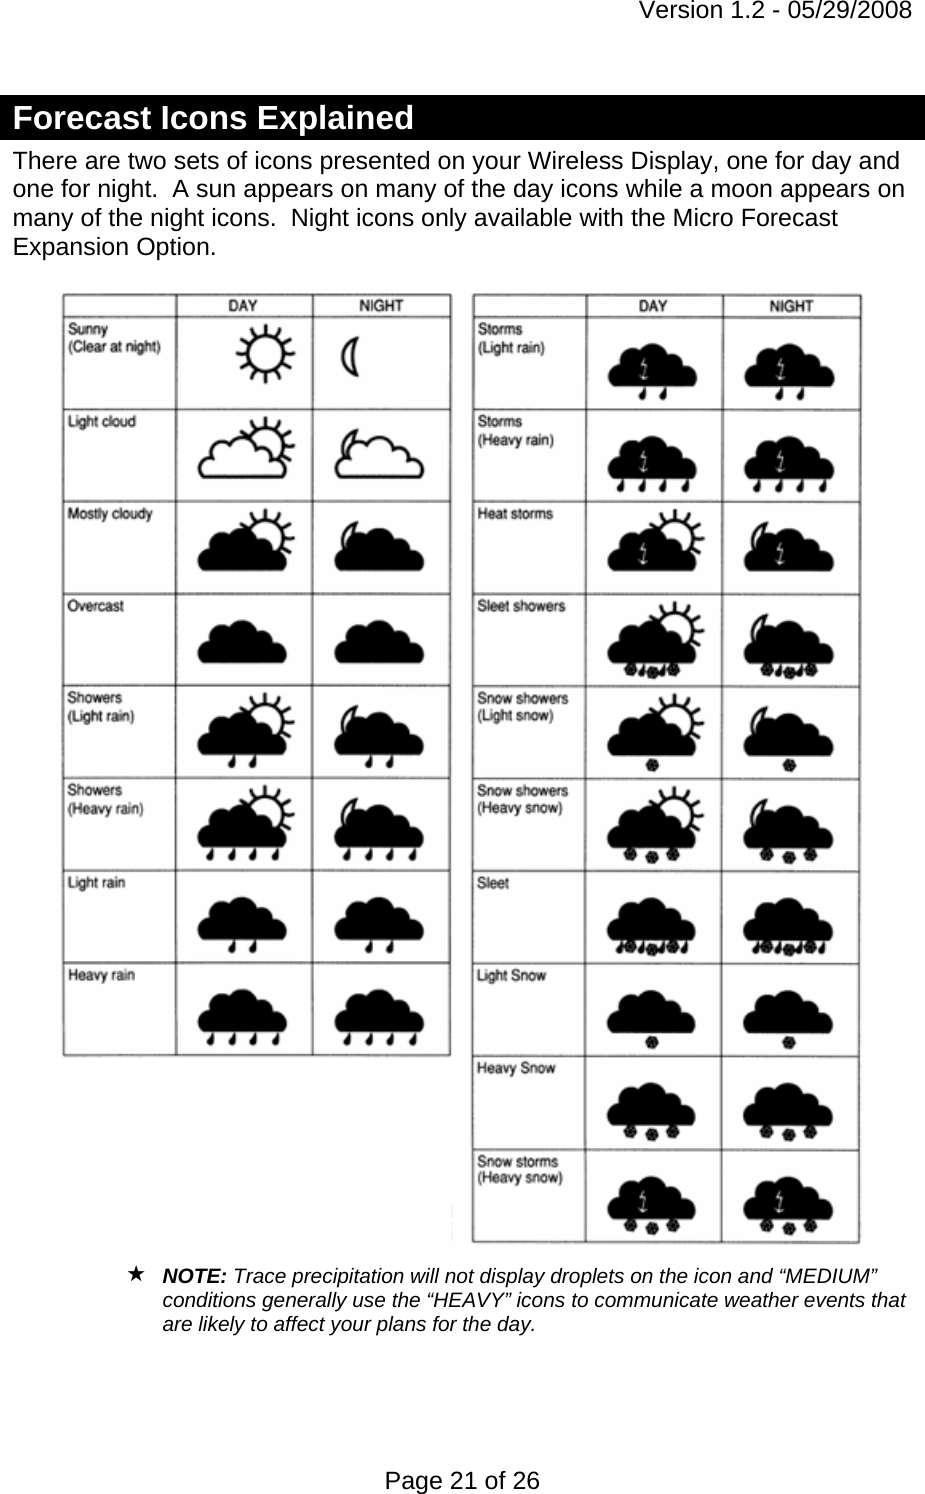 Version 1.2 - 05/29/2008 Page 21 of 26 Forecast Icons Explained There are two sets of icons presented on your Wireless Display, one for day and one for night.  A sun appears on many of the day icons while a moon appears on many of the night icons.  Night icons only available with the Micro Forecast Expansion Option.    NOTE: Trace precipitation will not display droplets on the icon and “MEDIUM” conditions generally use the “HEAVY” icons to communicate weather events that are likely to affect your plans for the day.